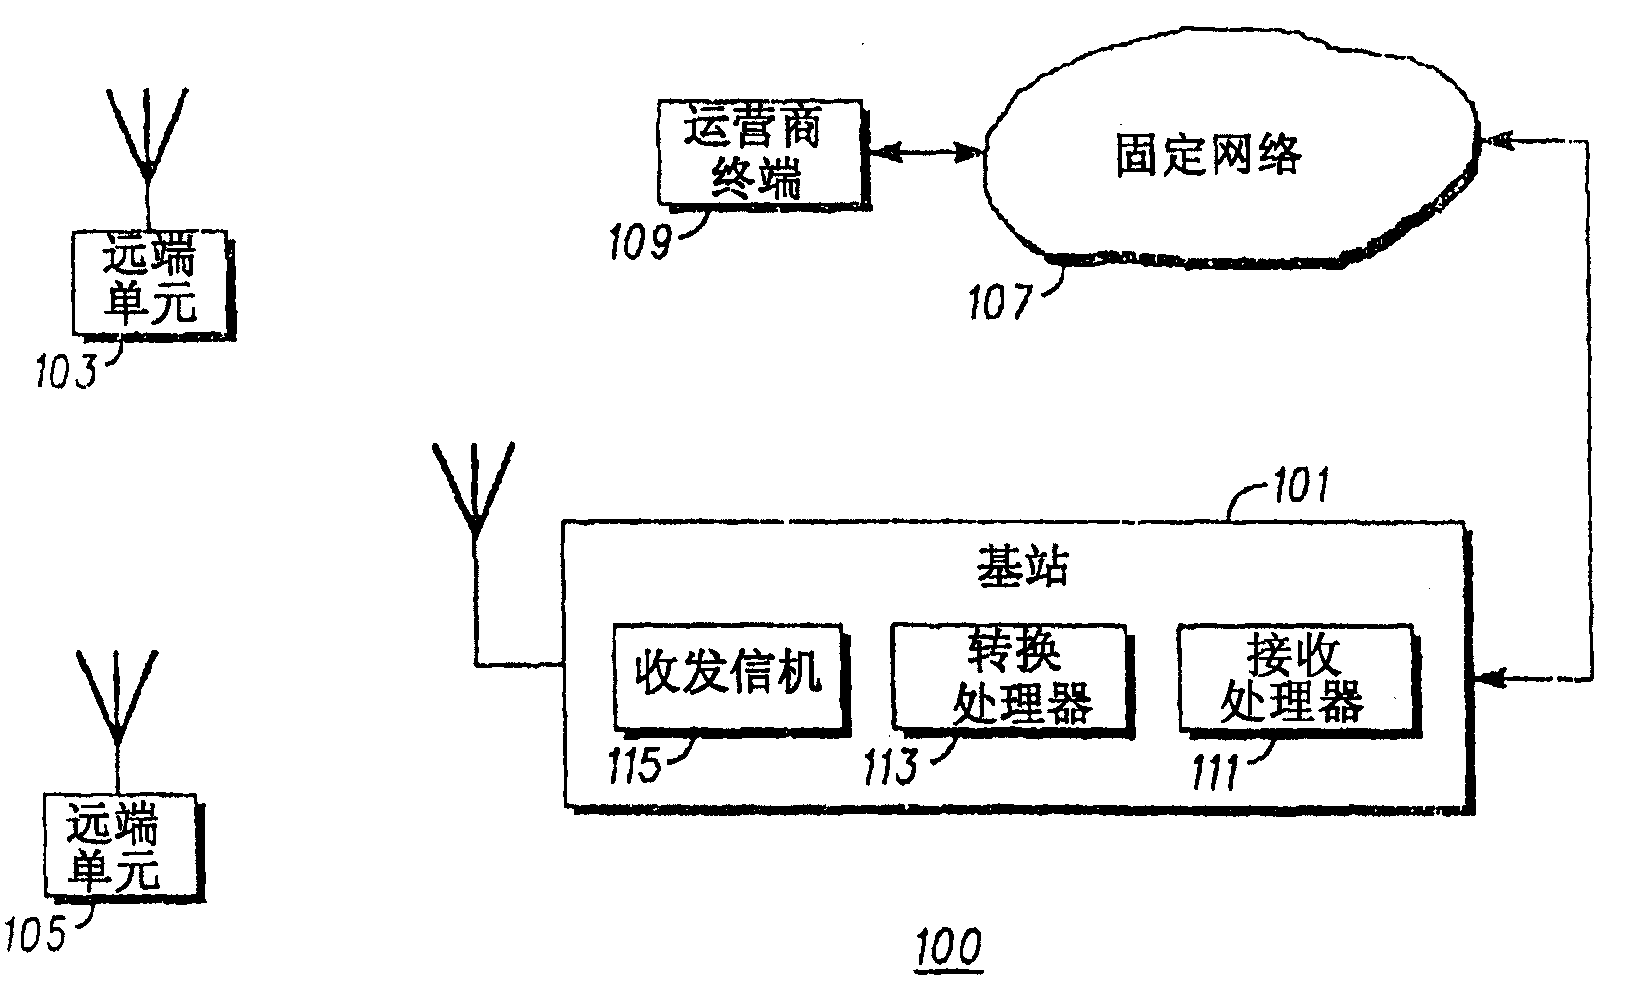 A cellular communication system, network element and method of operating the same